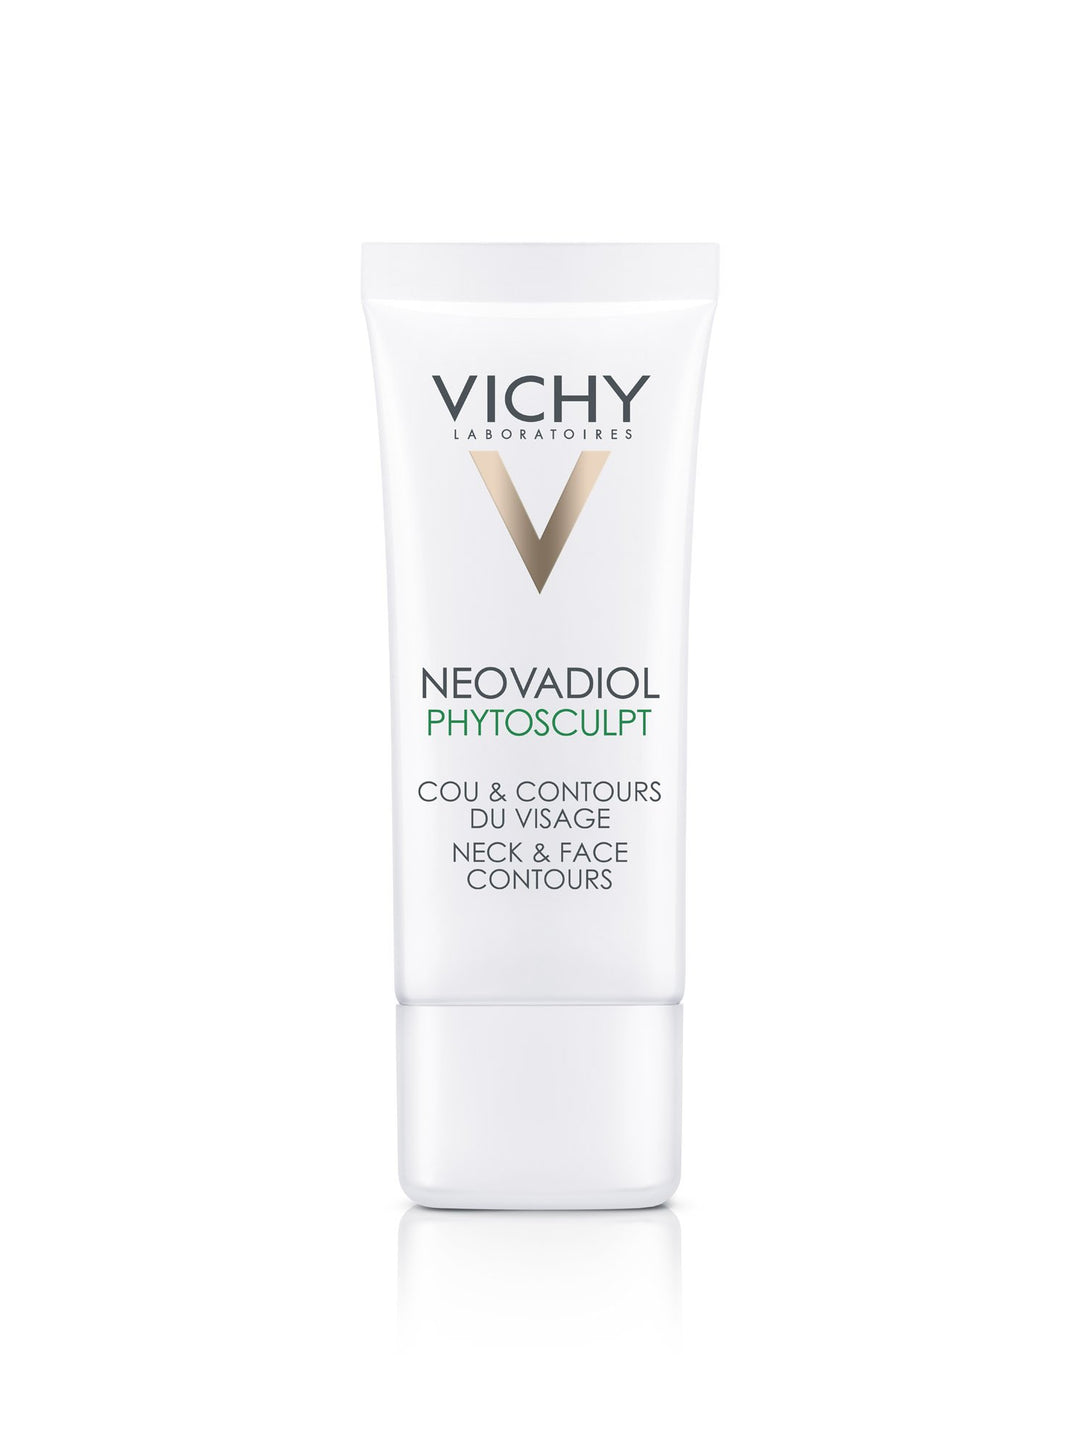 Vichy NEOVADIOL Phytosculpt - SkinEffects Zwolle